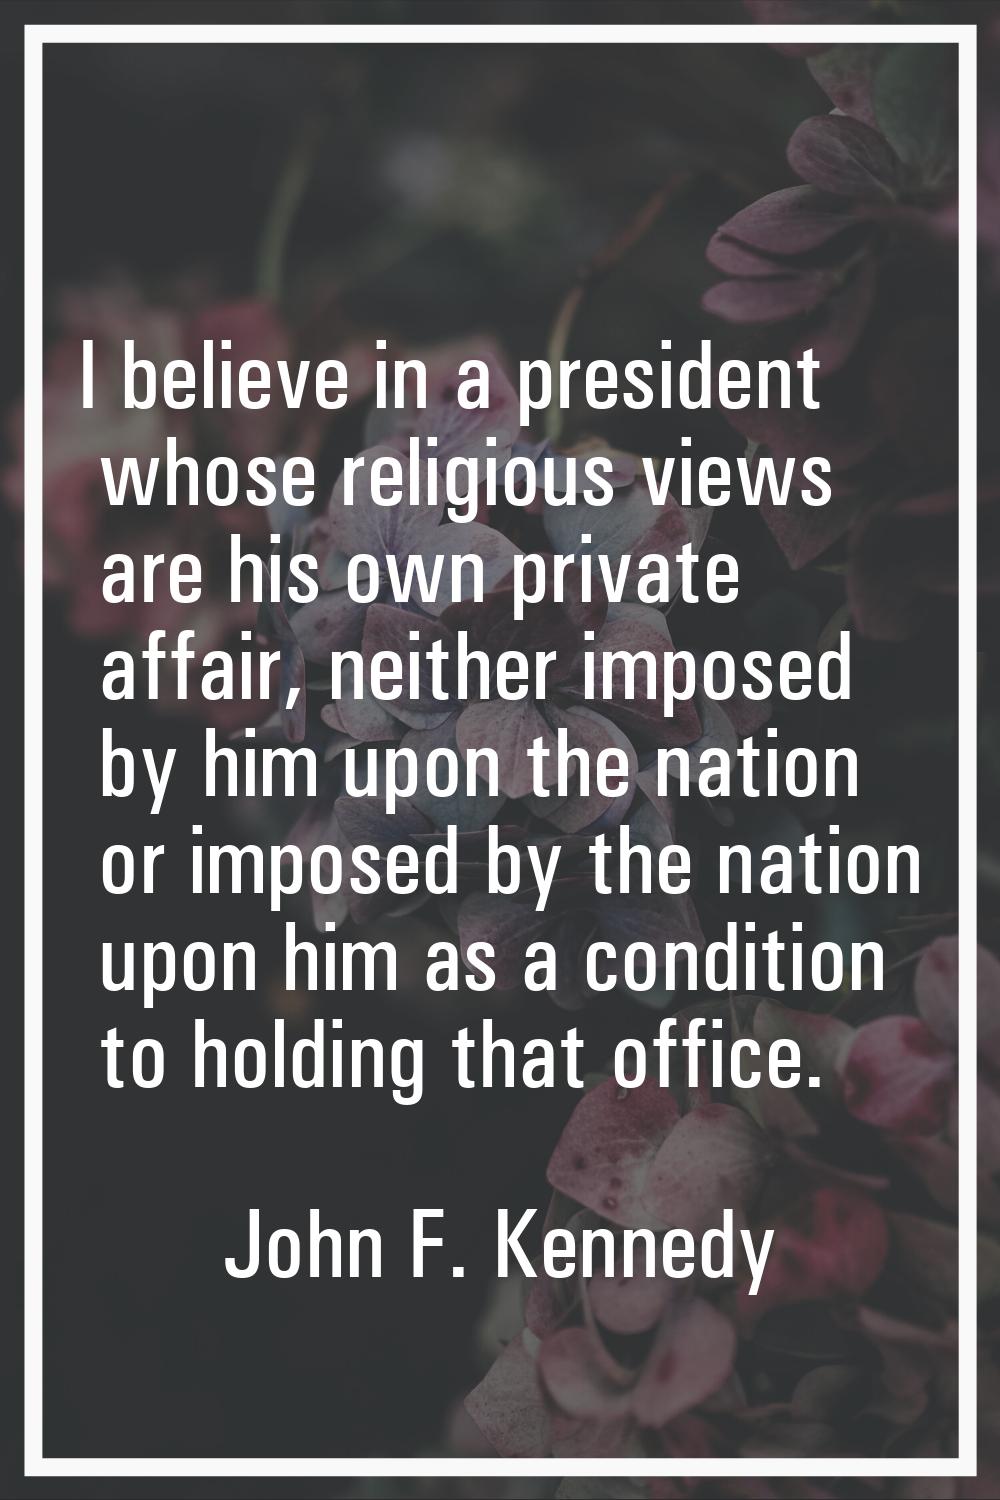 I believe in a president whose religious views are his own private affair, neither imposed by him u